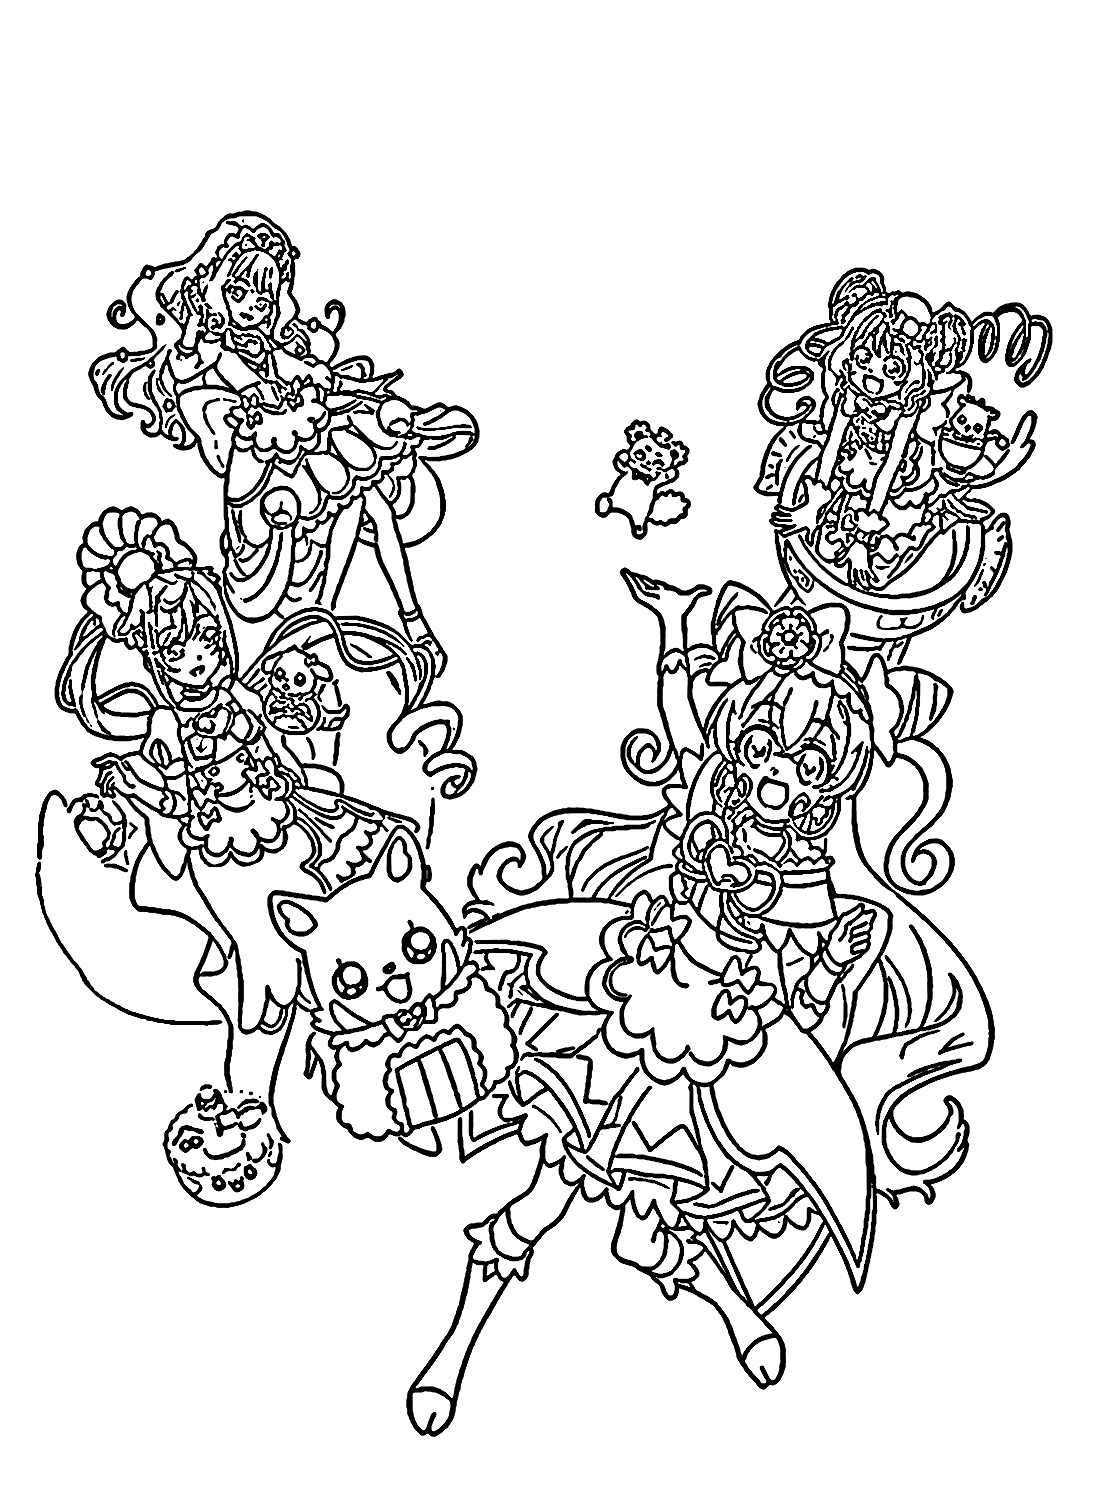 Delicious Party Pretty Cure Coloring Pages Printable for Free Download